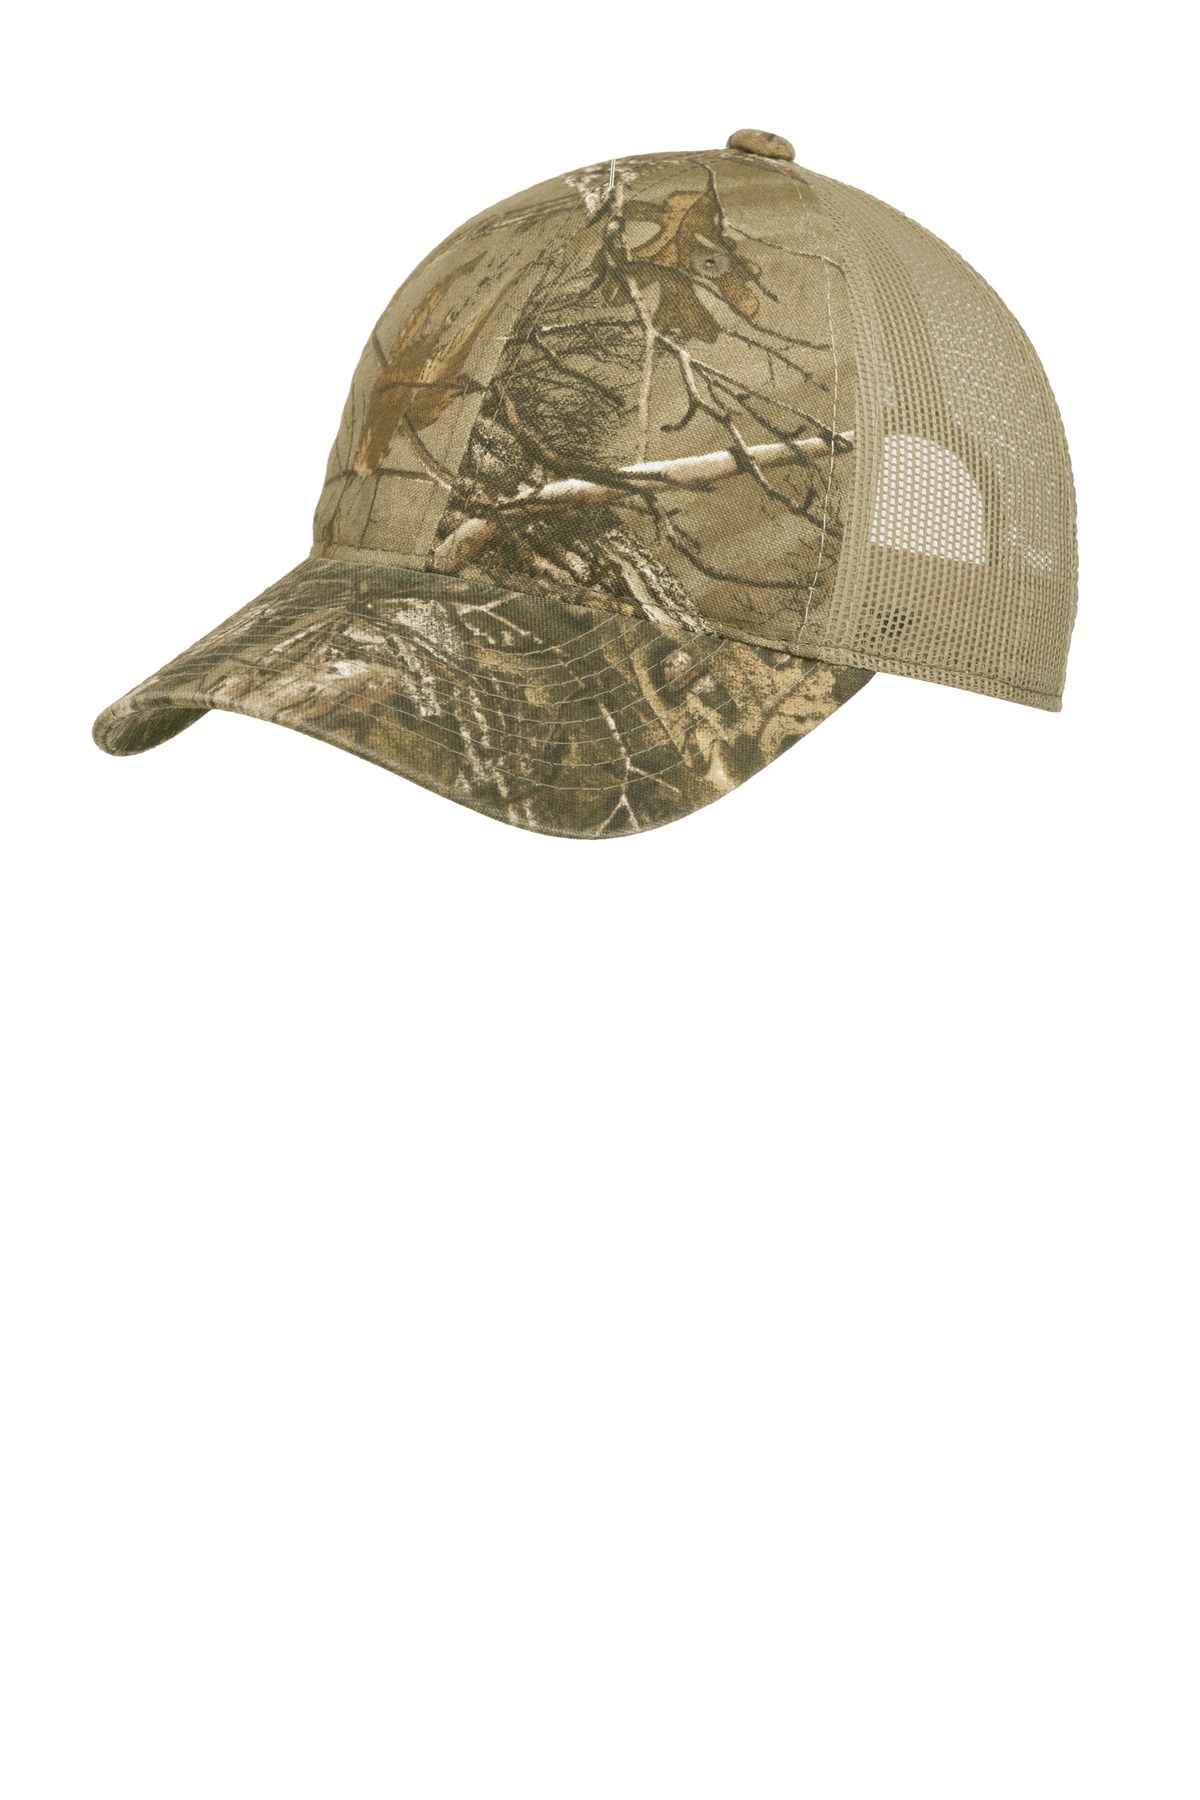 Port Authority Unstructured Camouflage Mesh Back Cap. C929